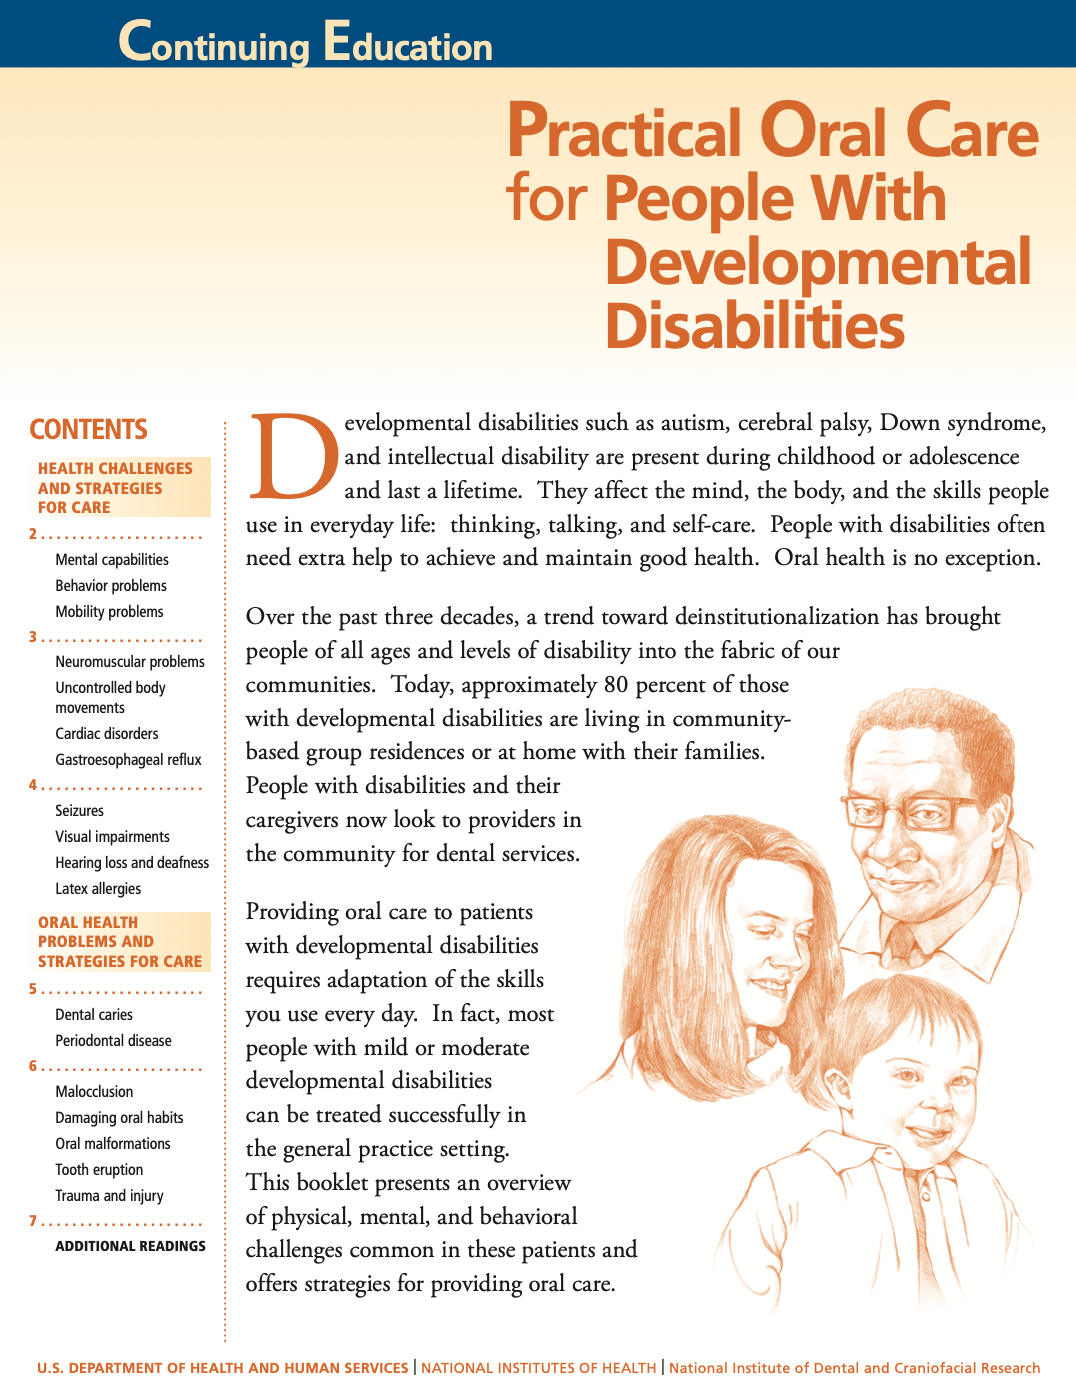 Practical Oral Care for People with Developmental Disabilities